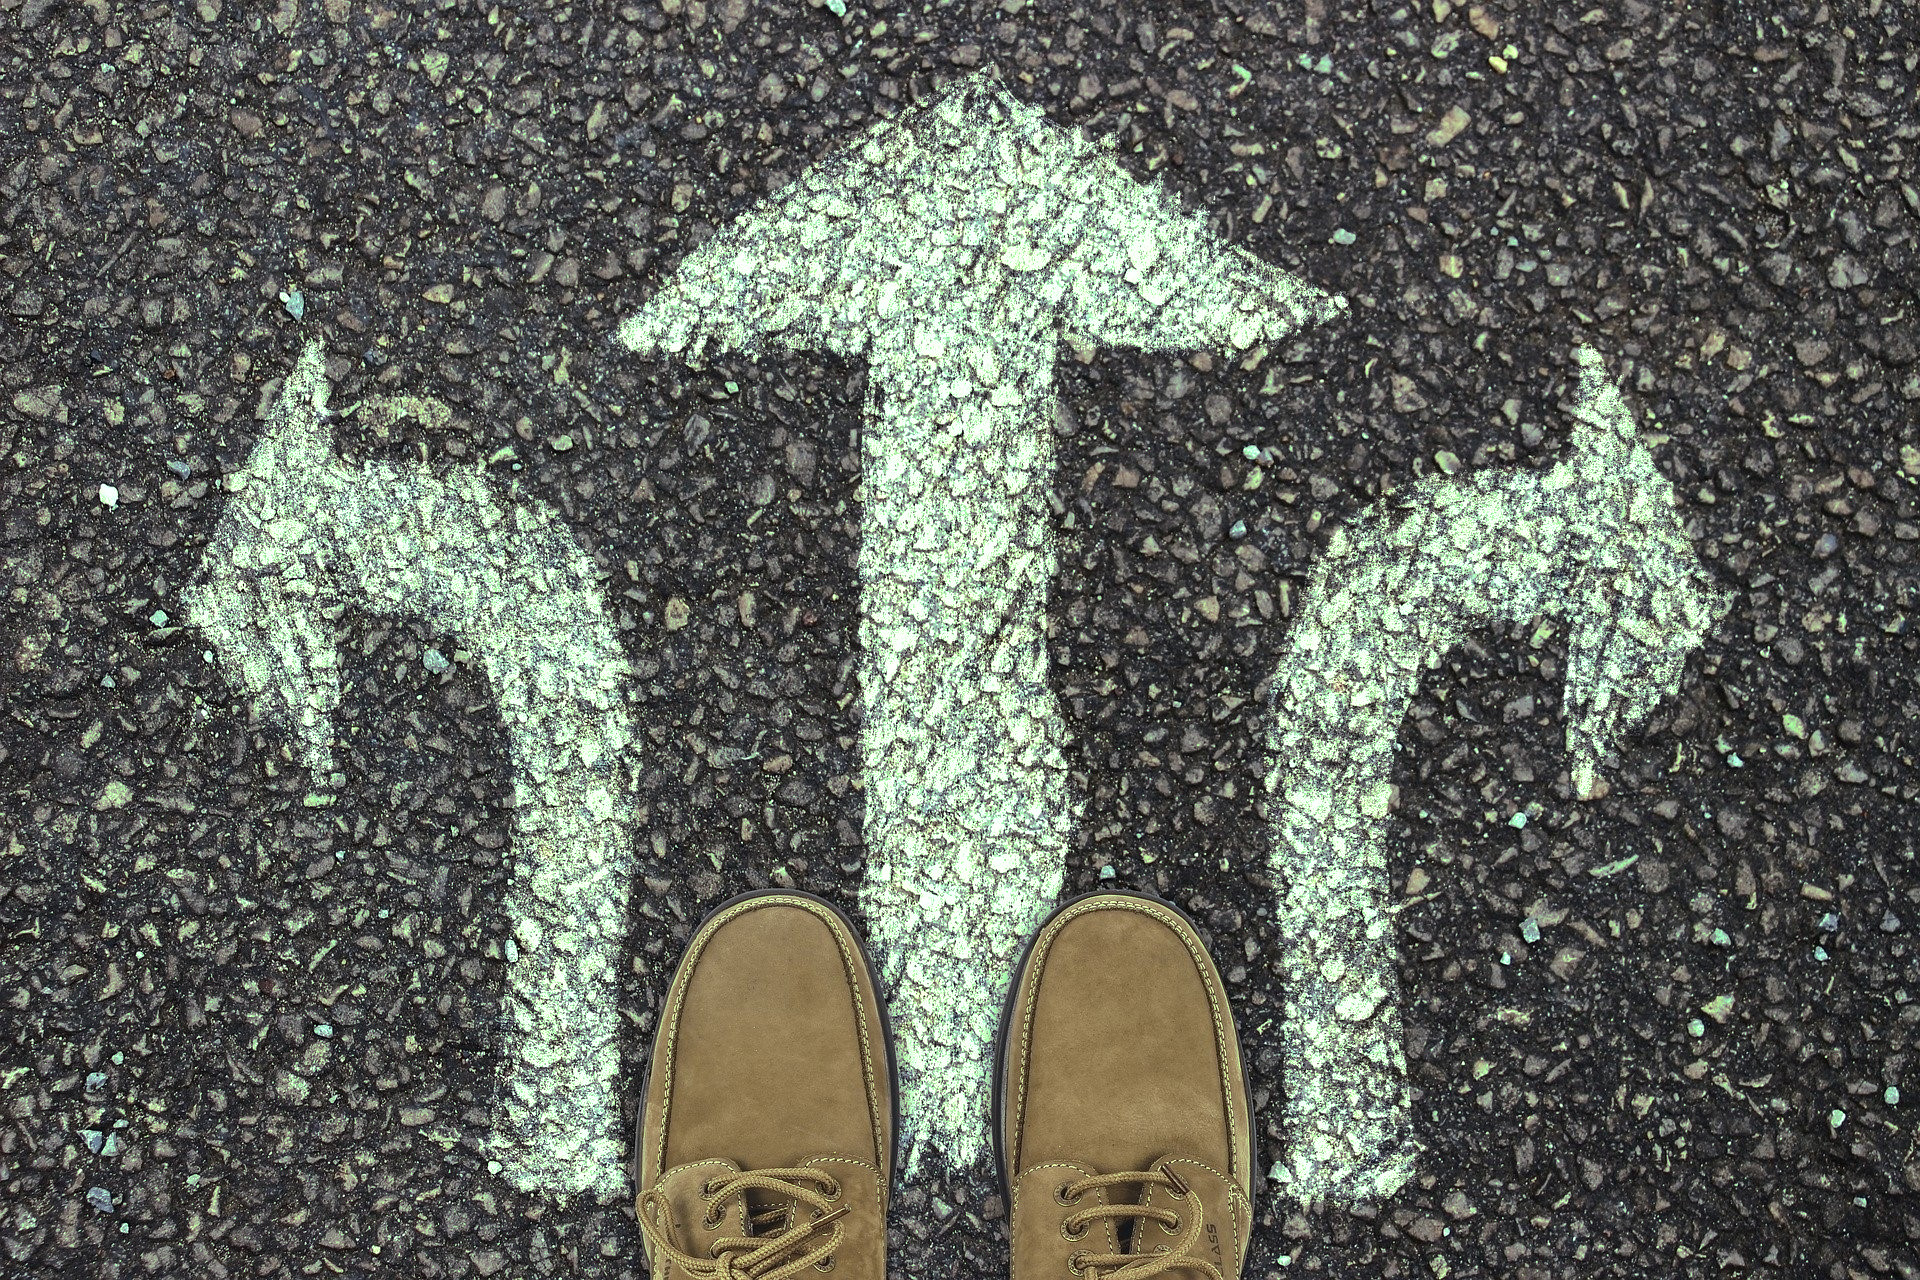 Shoes stand in front of direction arrows